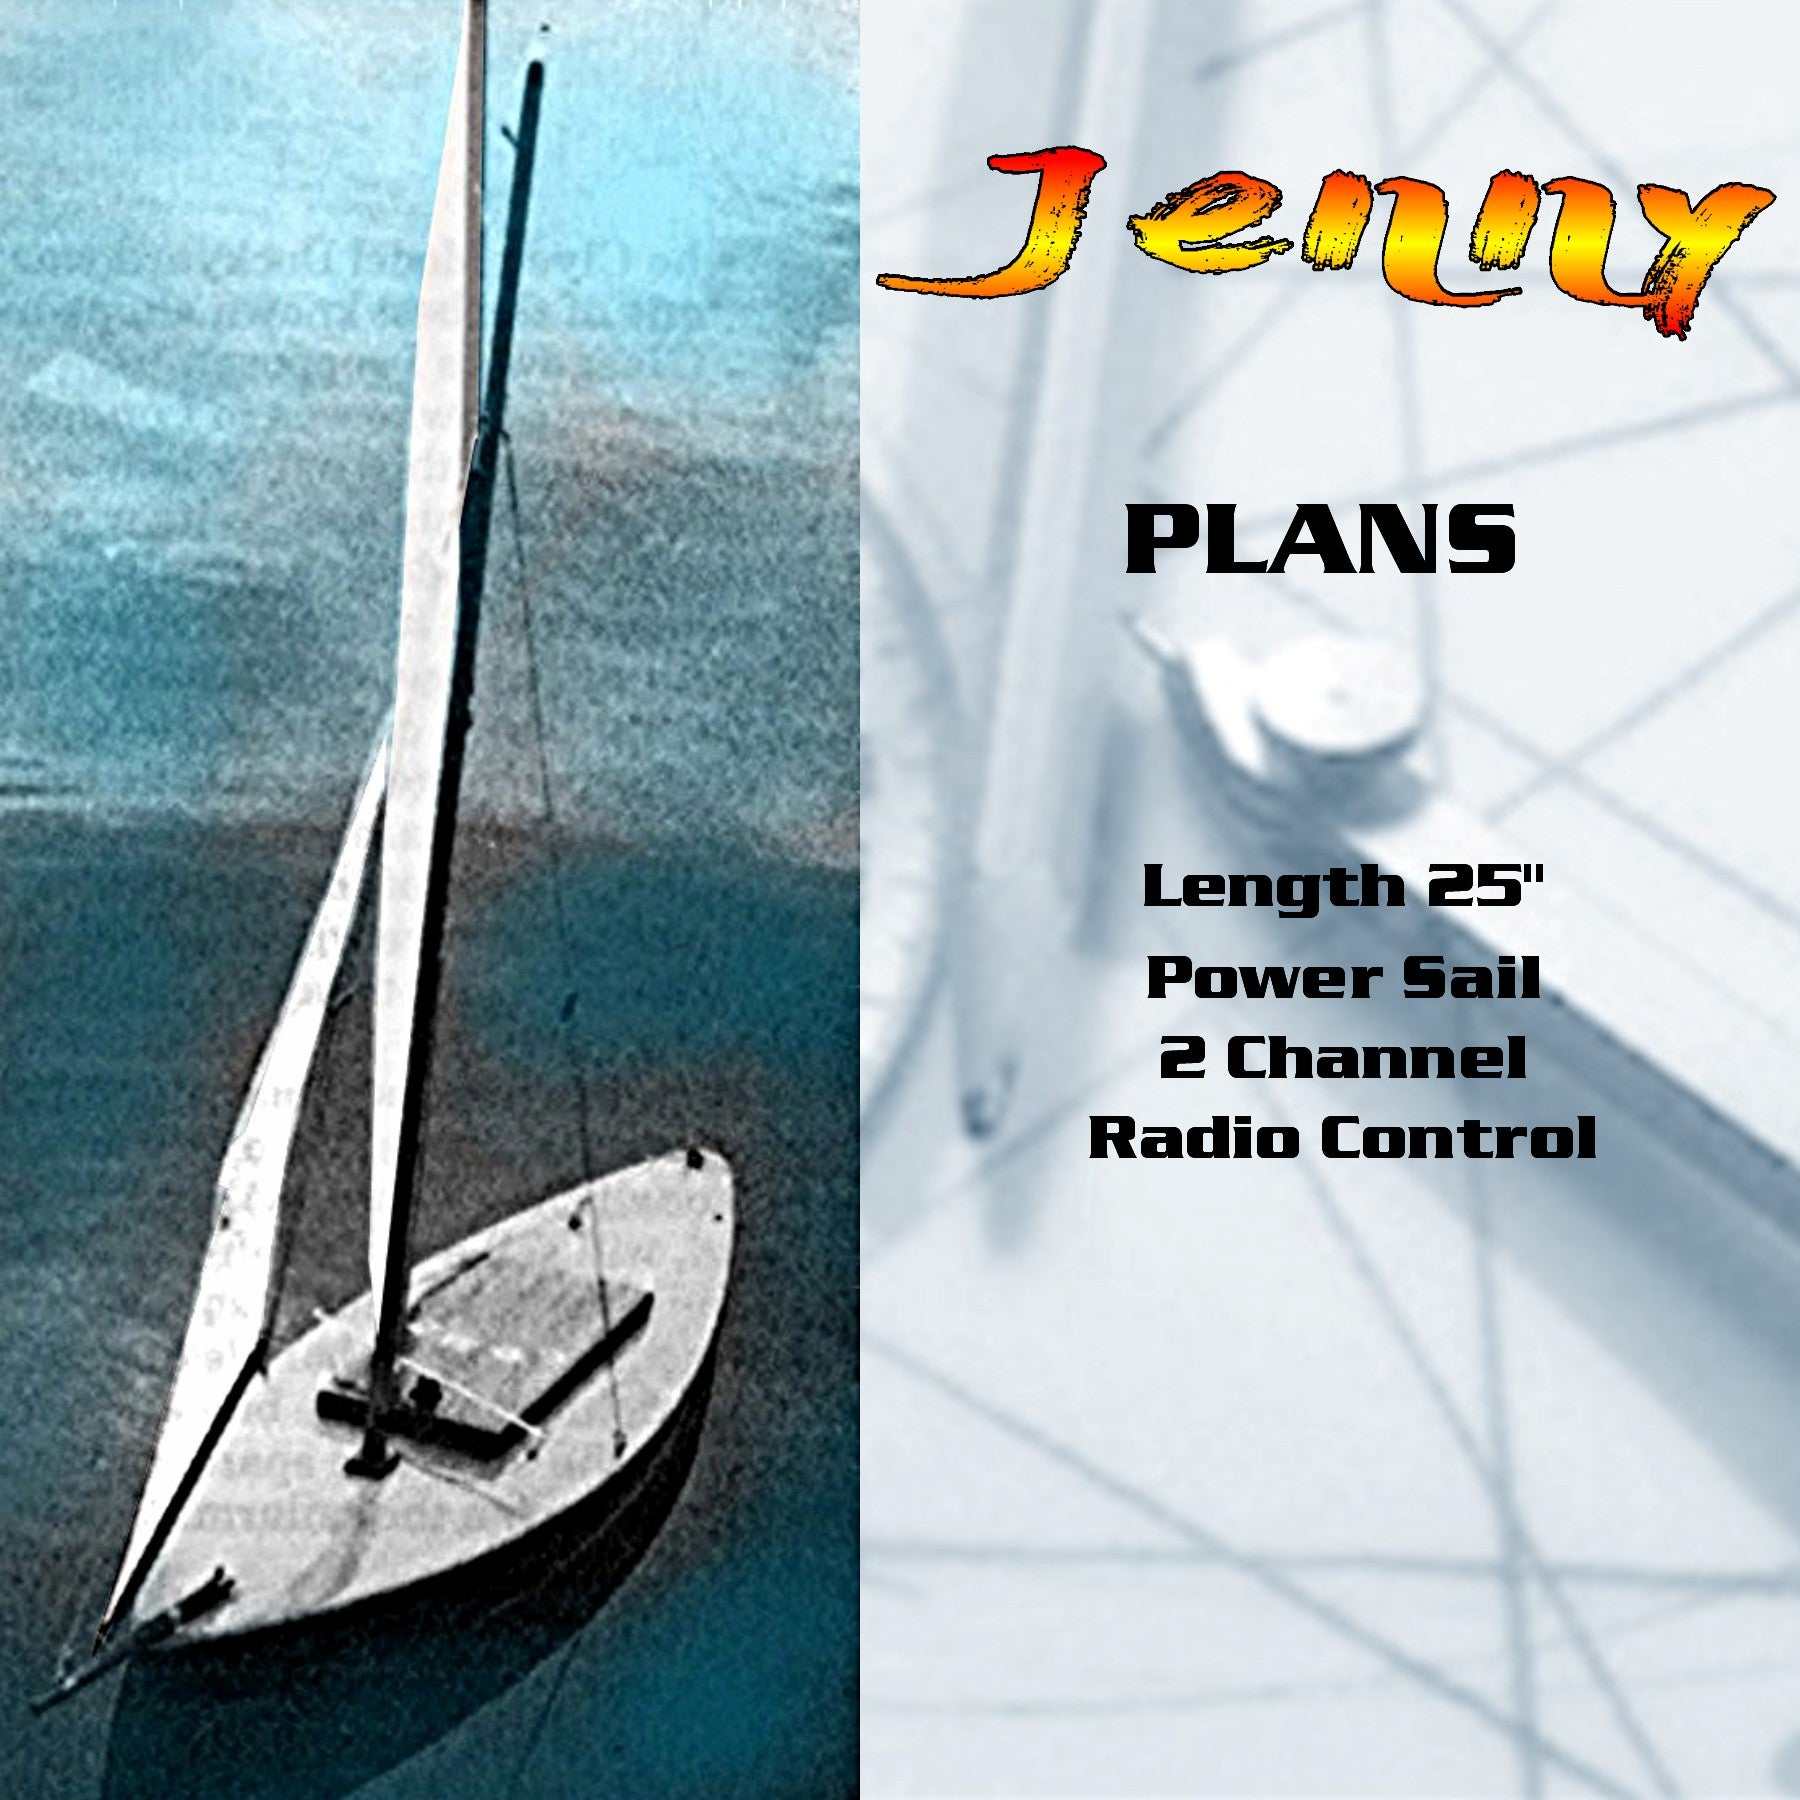 listing is for full size printed plans sailing yacht l 25" suitable for 2 channel radio control